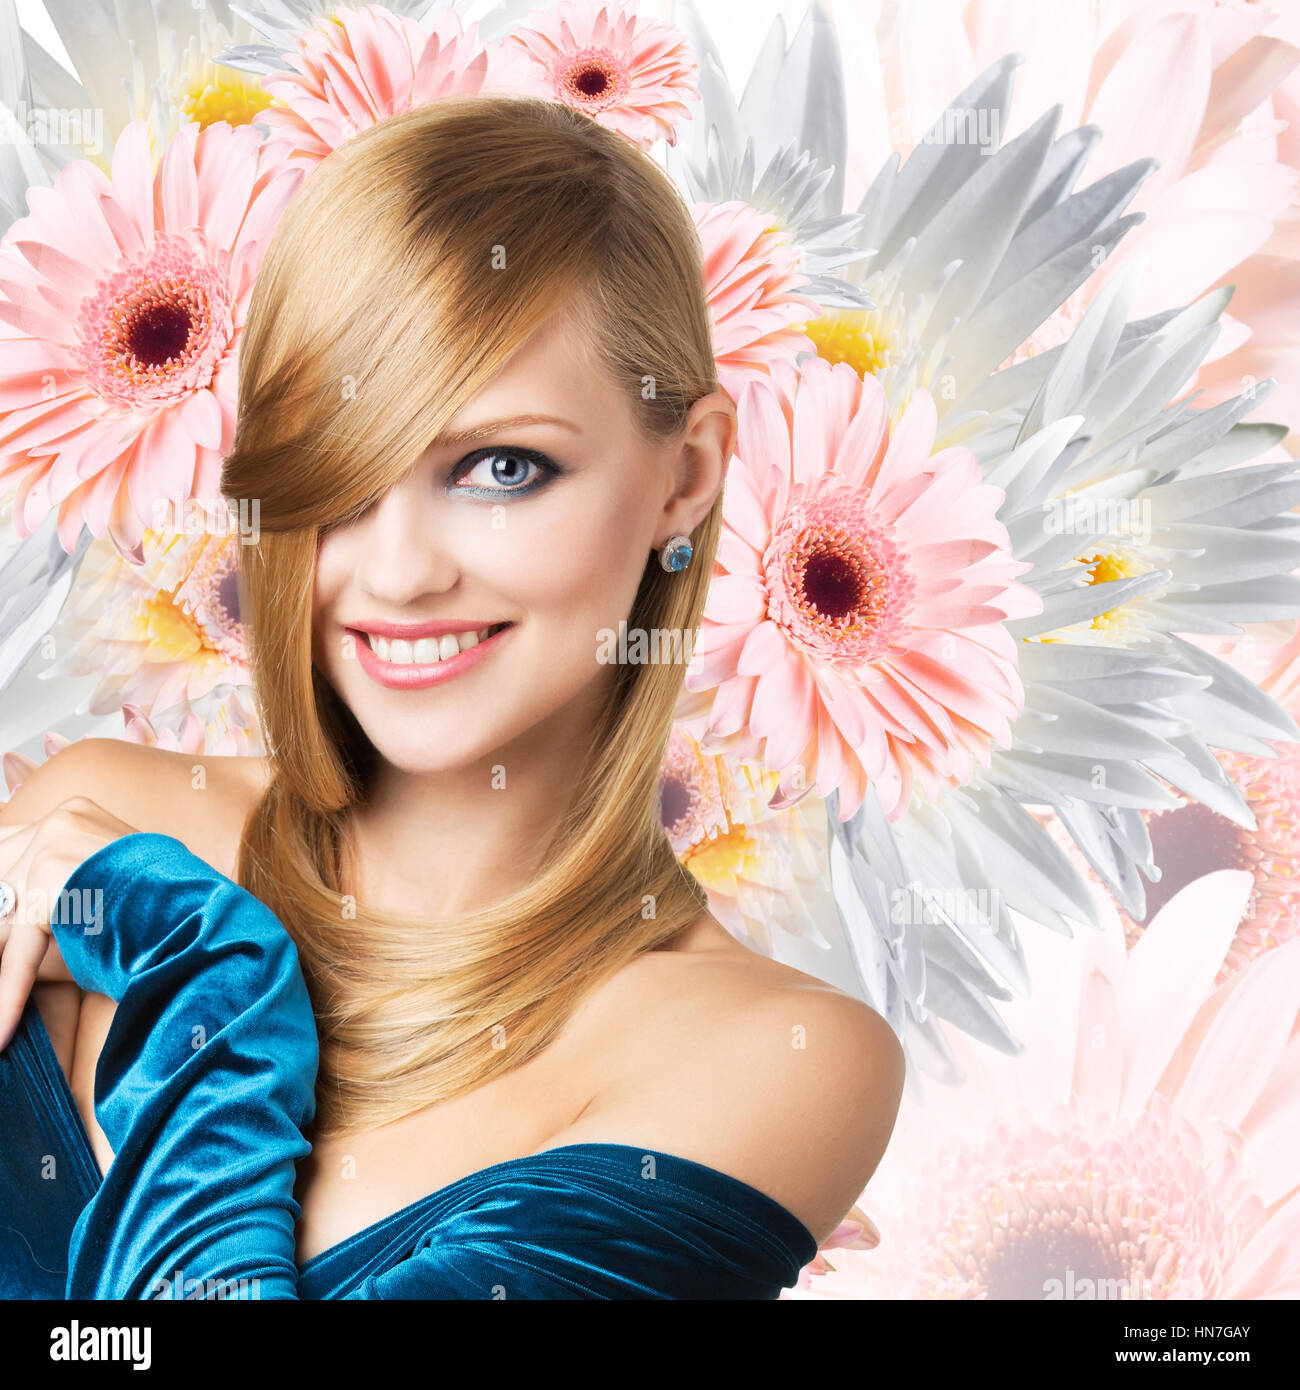 Fashion model over bouquet of flowers background. Stock Photo